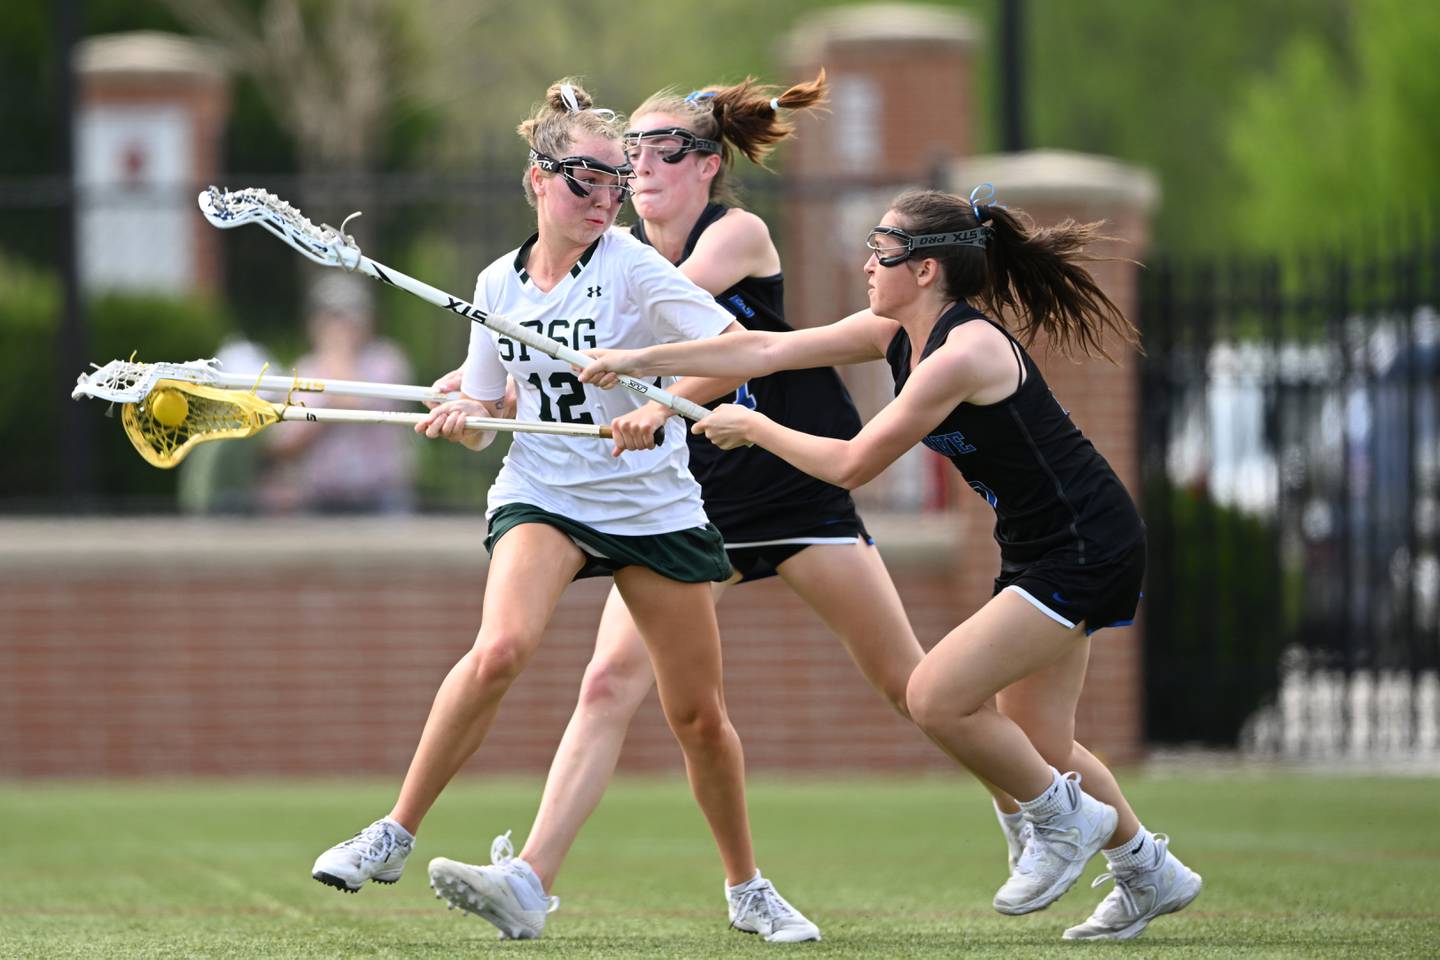 St. PaulsÕ Marleigh OÕDay (12) prepares to shoot as DarienÕs Maggie Bellisimo (5) and Morgan Massey (7) defend in the first half of a lacrosse game Saturday, April 15, 2023, in Sparks Glencoe, MD.